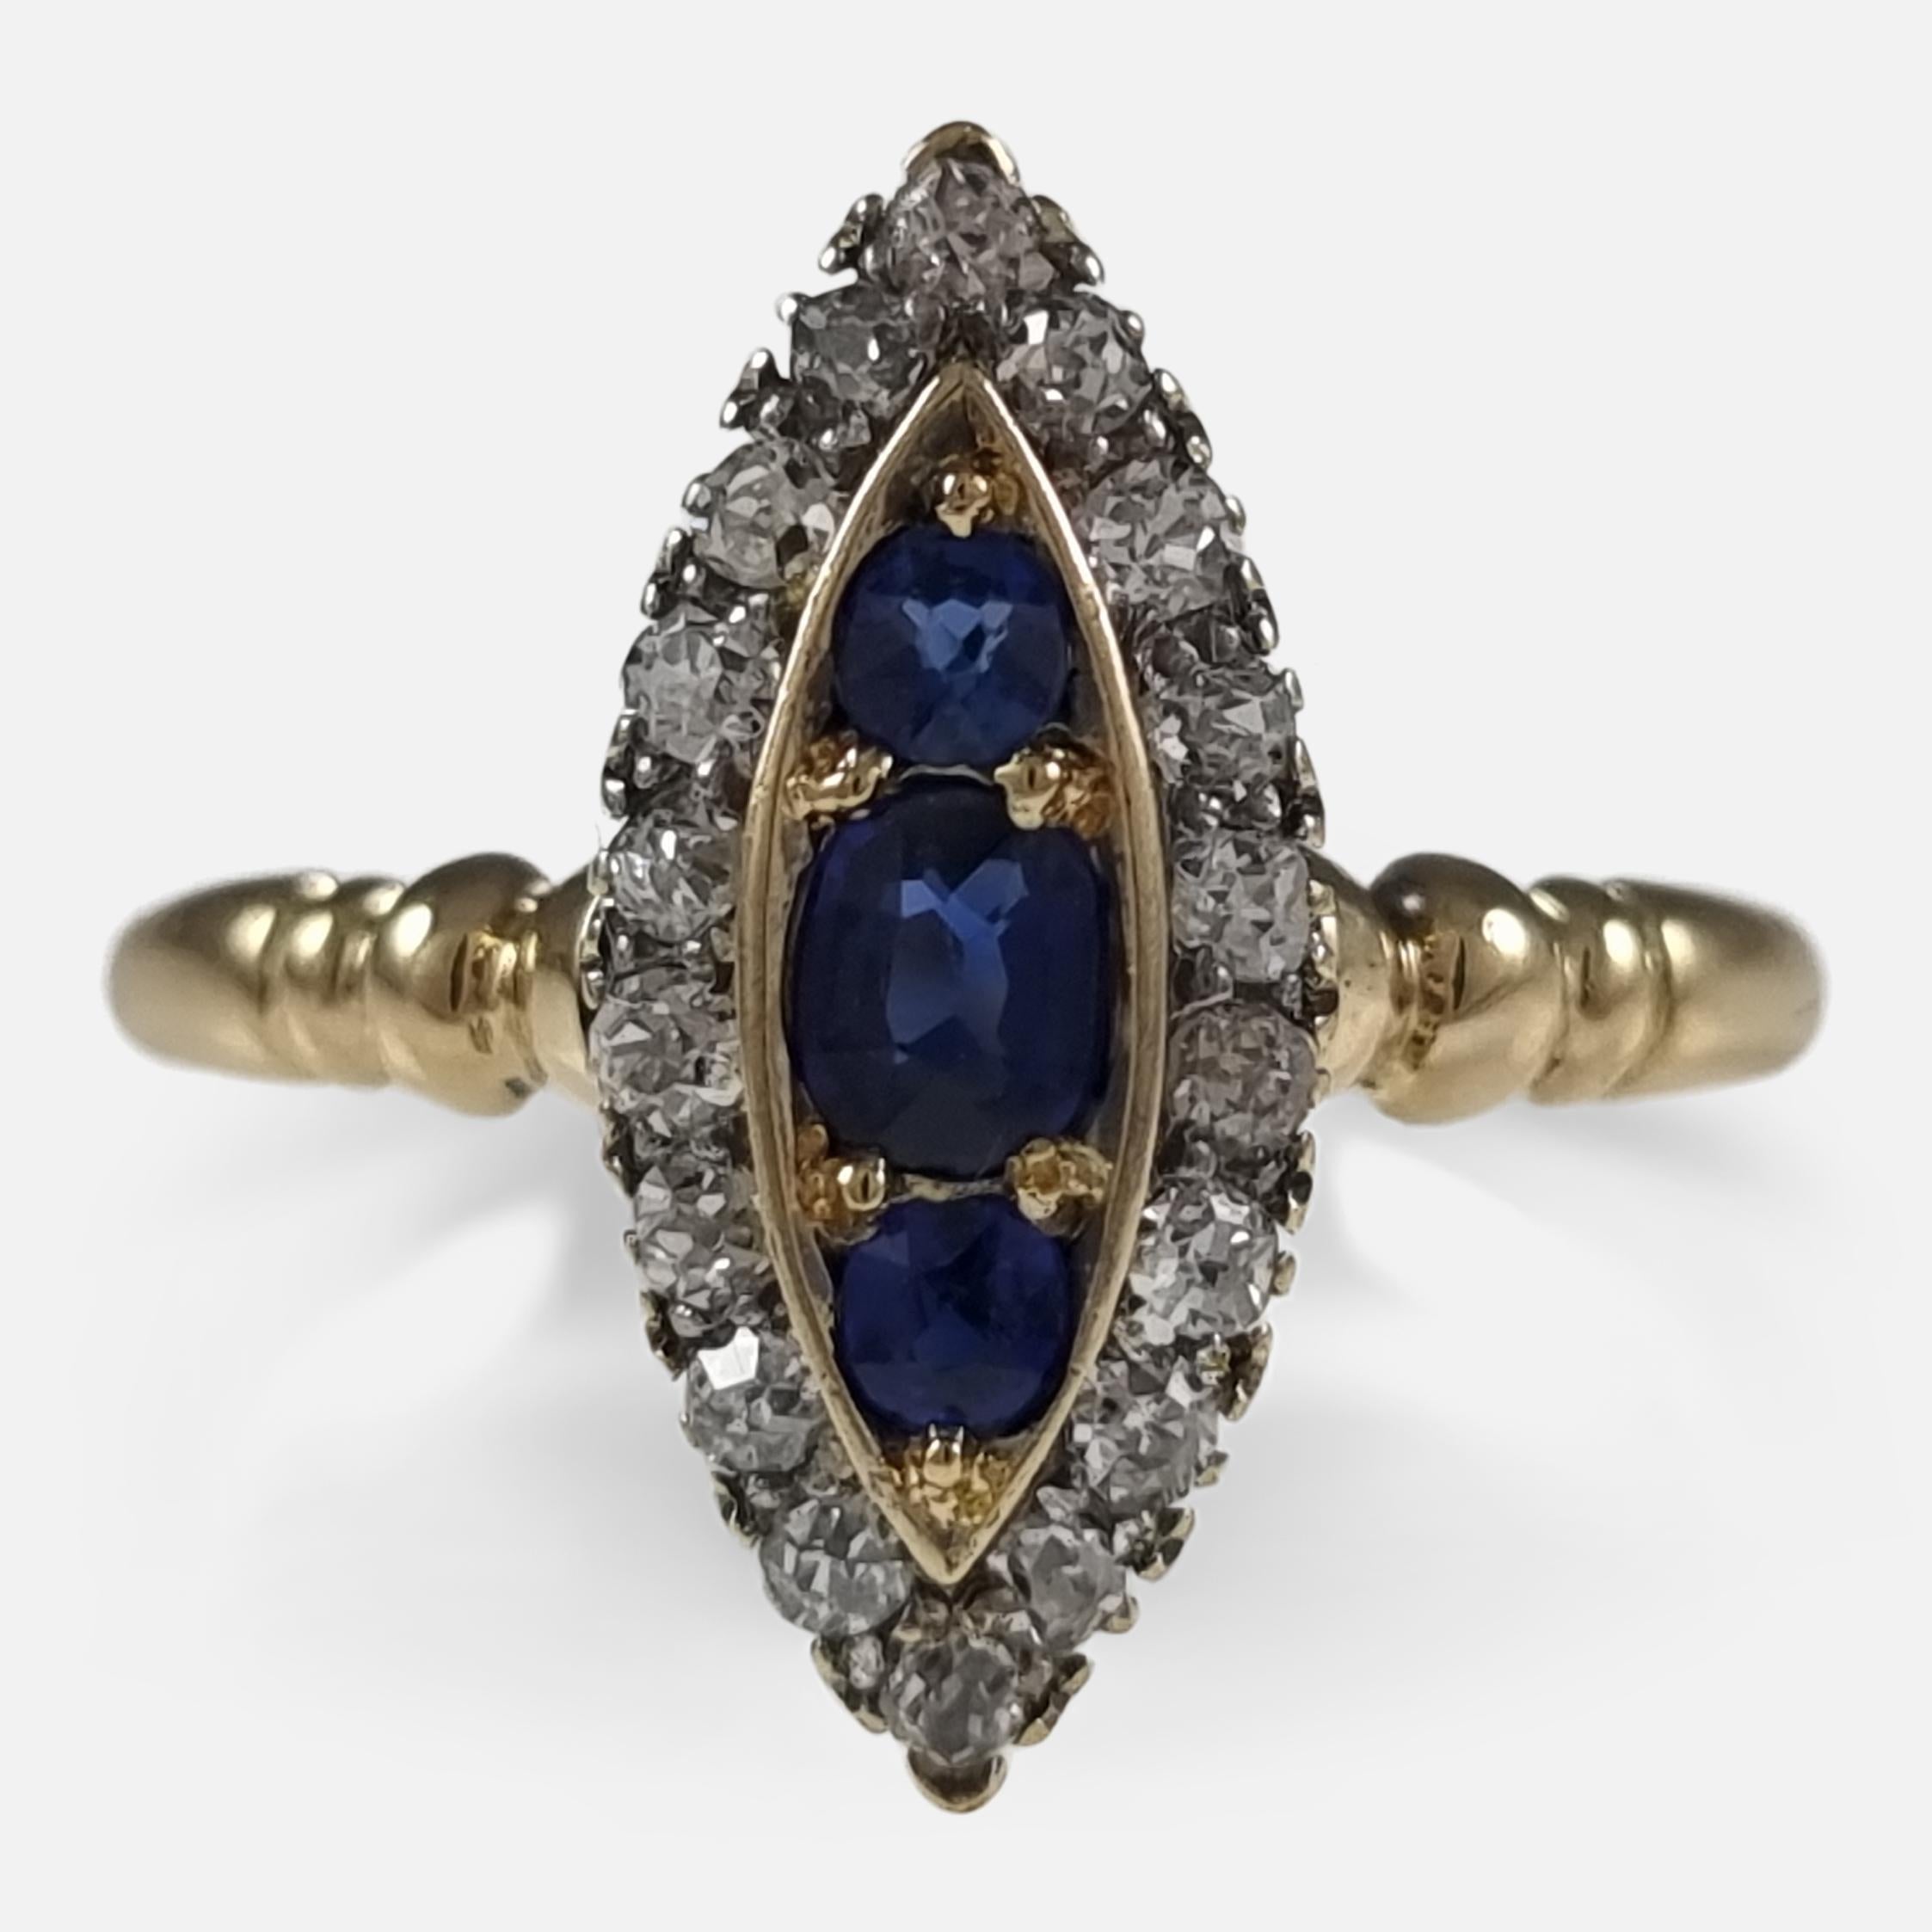 A late Victorian 18ct yellow gold sapphire and diamond Navette (Marquise) cluster ring. The ring is set with 3 sapphires surrounded by a further 18 diamonds.

The ring is stamped '18ct' to denote 18ct gold fineness.

Period: - Late 19th